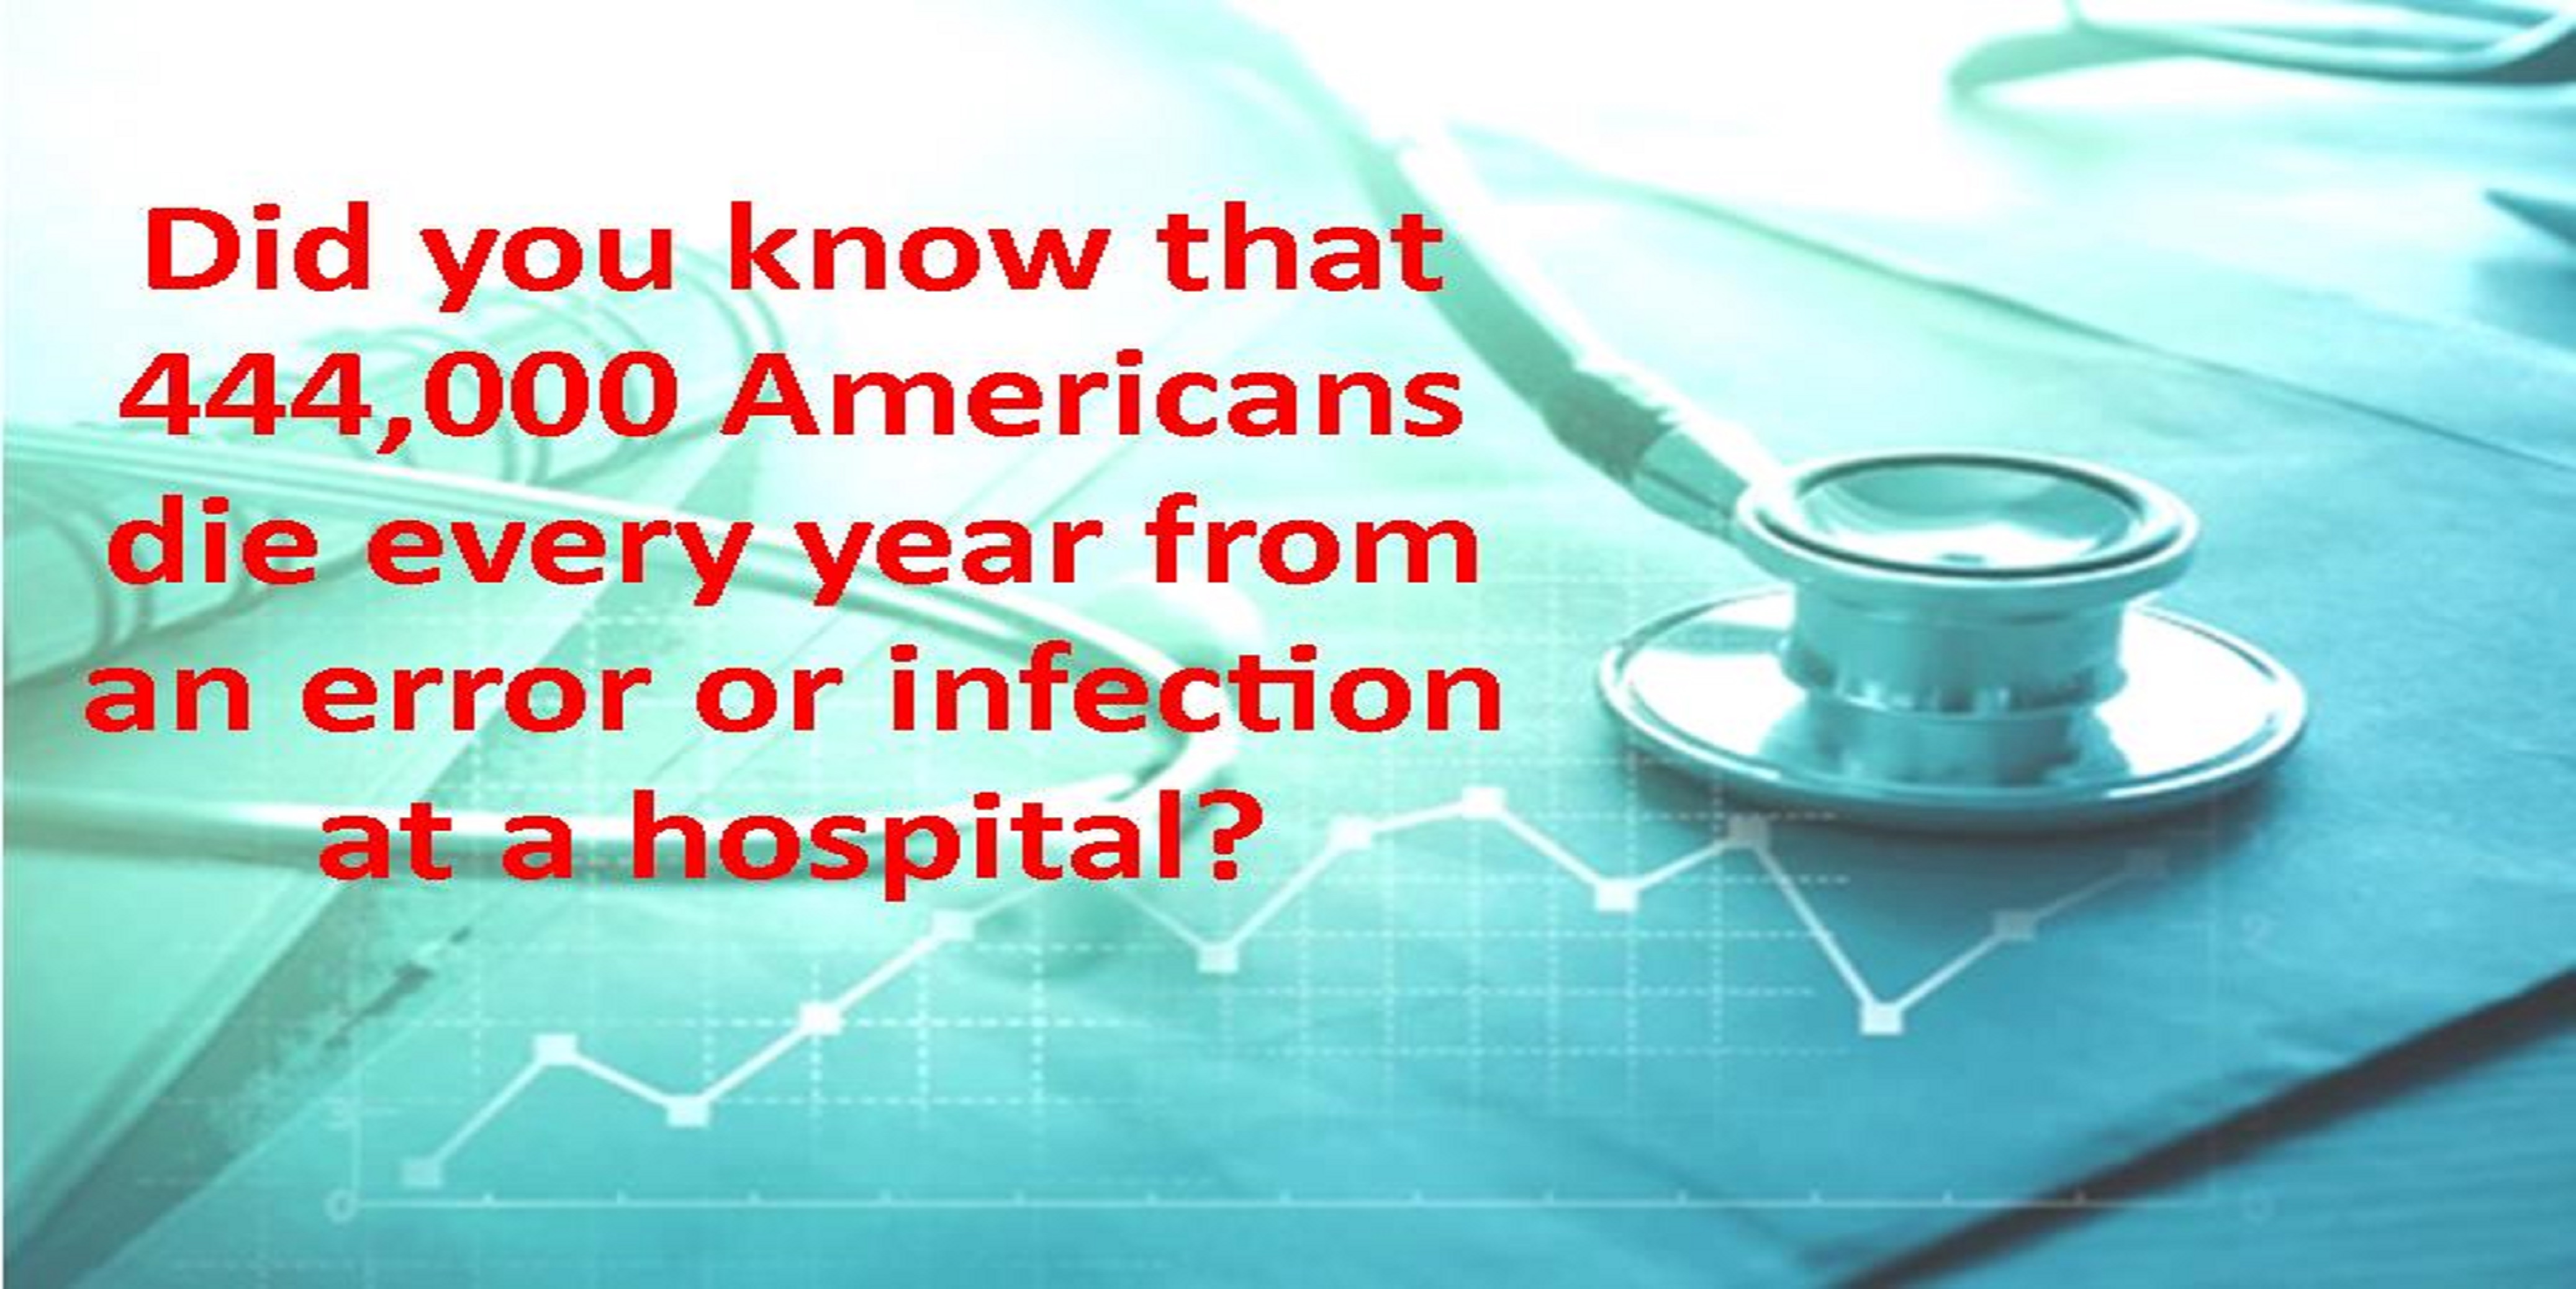 text: "Did you know that 444,000 Americans die every year from an error or infection at a hospital", charts and slethoscope